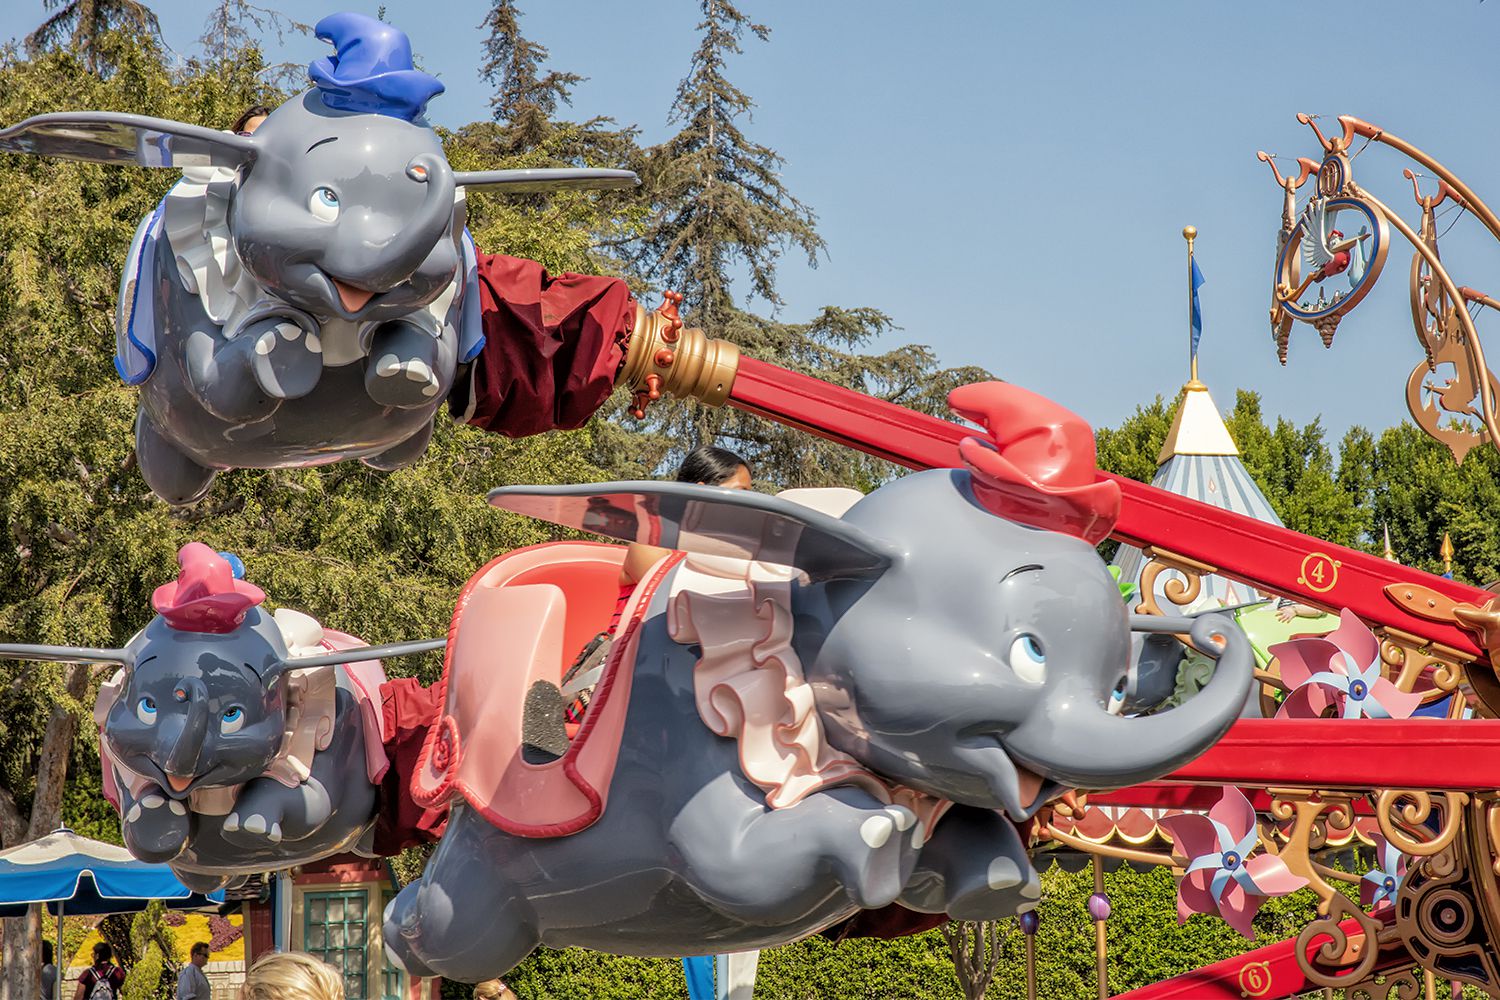 Dumbo Ride at Disneyland: Things You Need to Know